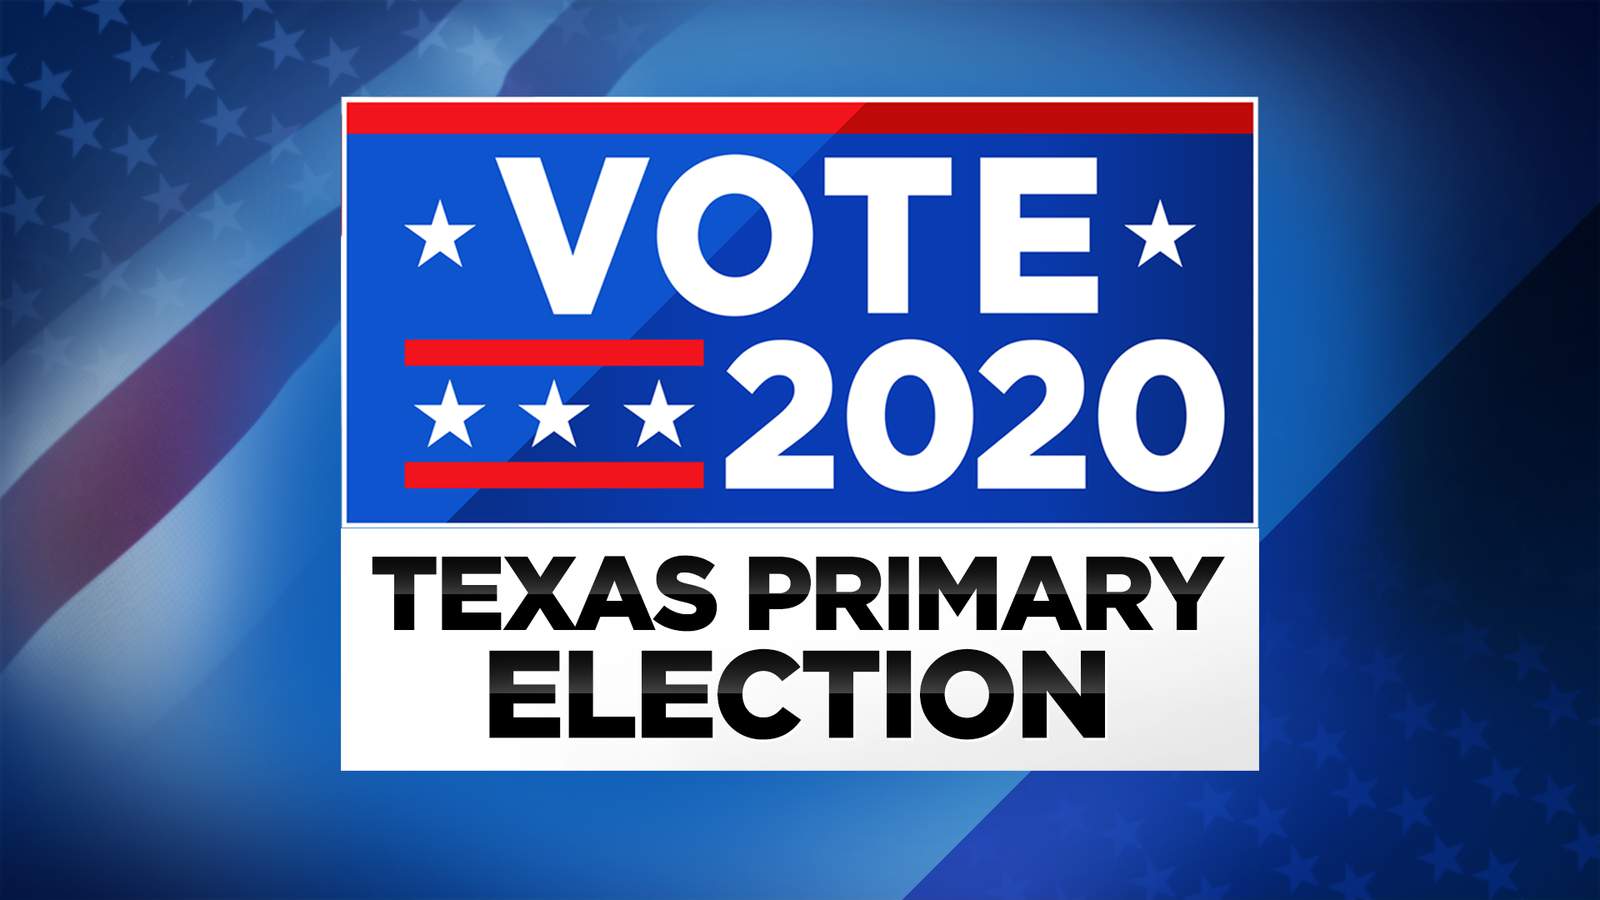 Monday is the deadline to register to vote in the Texas March primary election